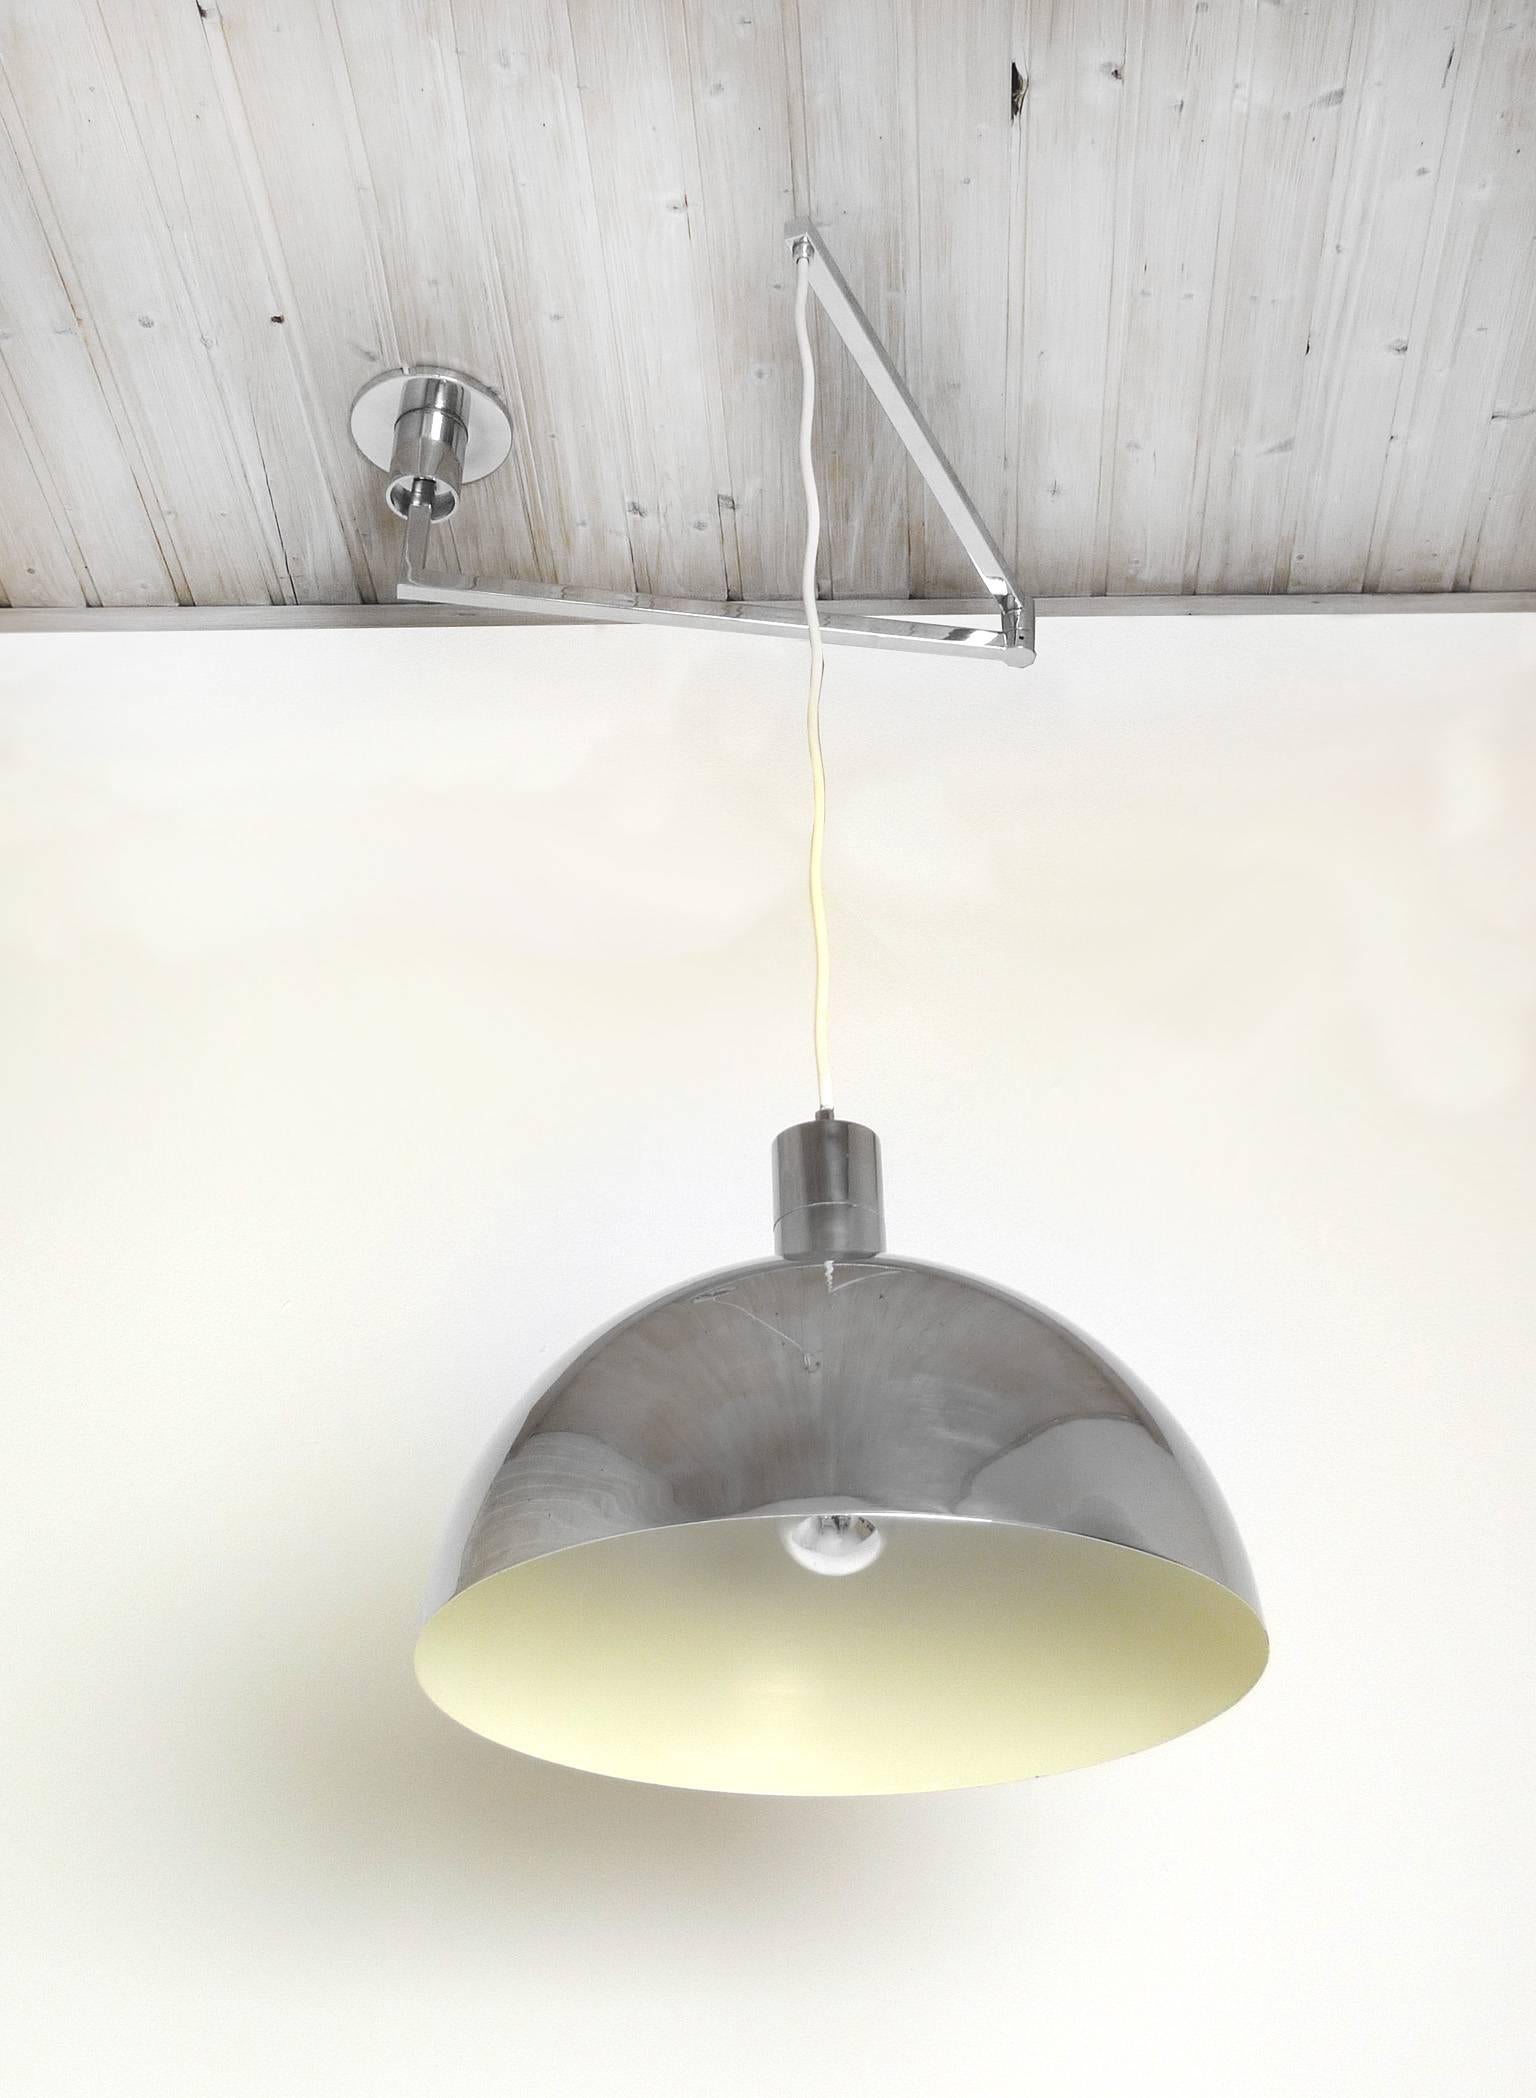 Elegant chrome-plated ceiling lamp from 1969 with two-piece metal arm, which can sprawl and rotate around the mounting. The bell has a diameter of 45 cm and is lacquered white inside. There is one E 27 bulb fitting.
This lamp is one of Franco